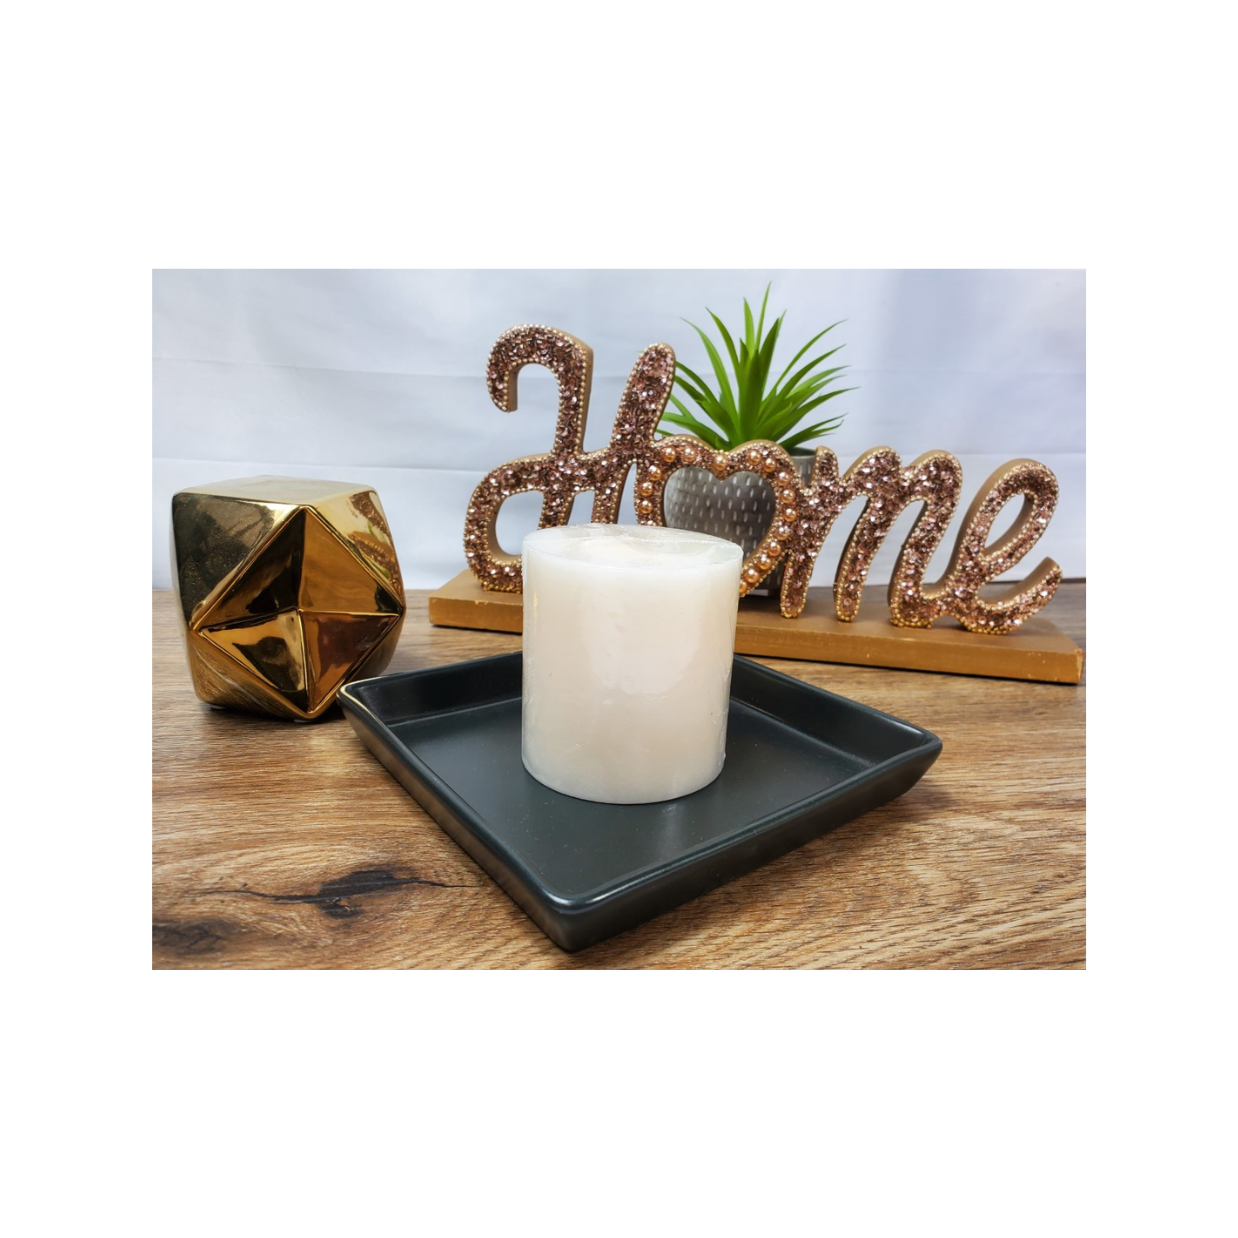 3 x 3 Ivory pillar candle in a tray fireside collection